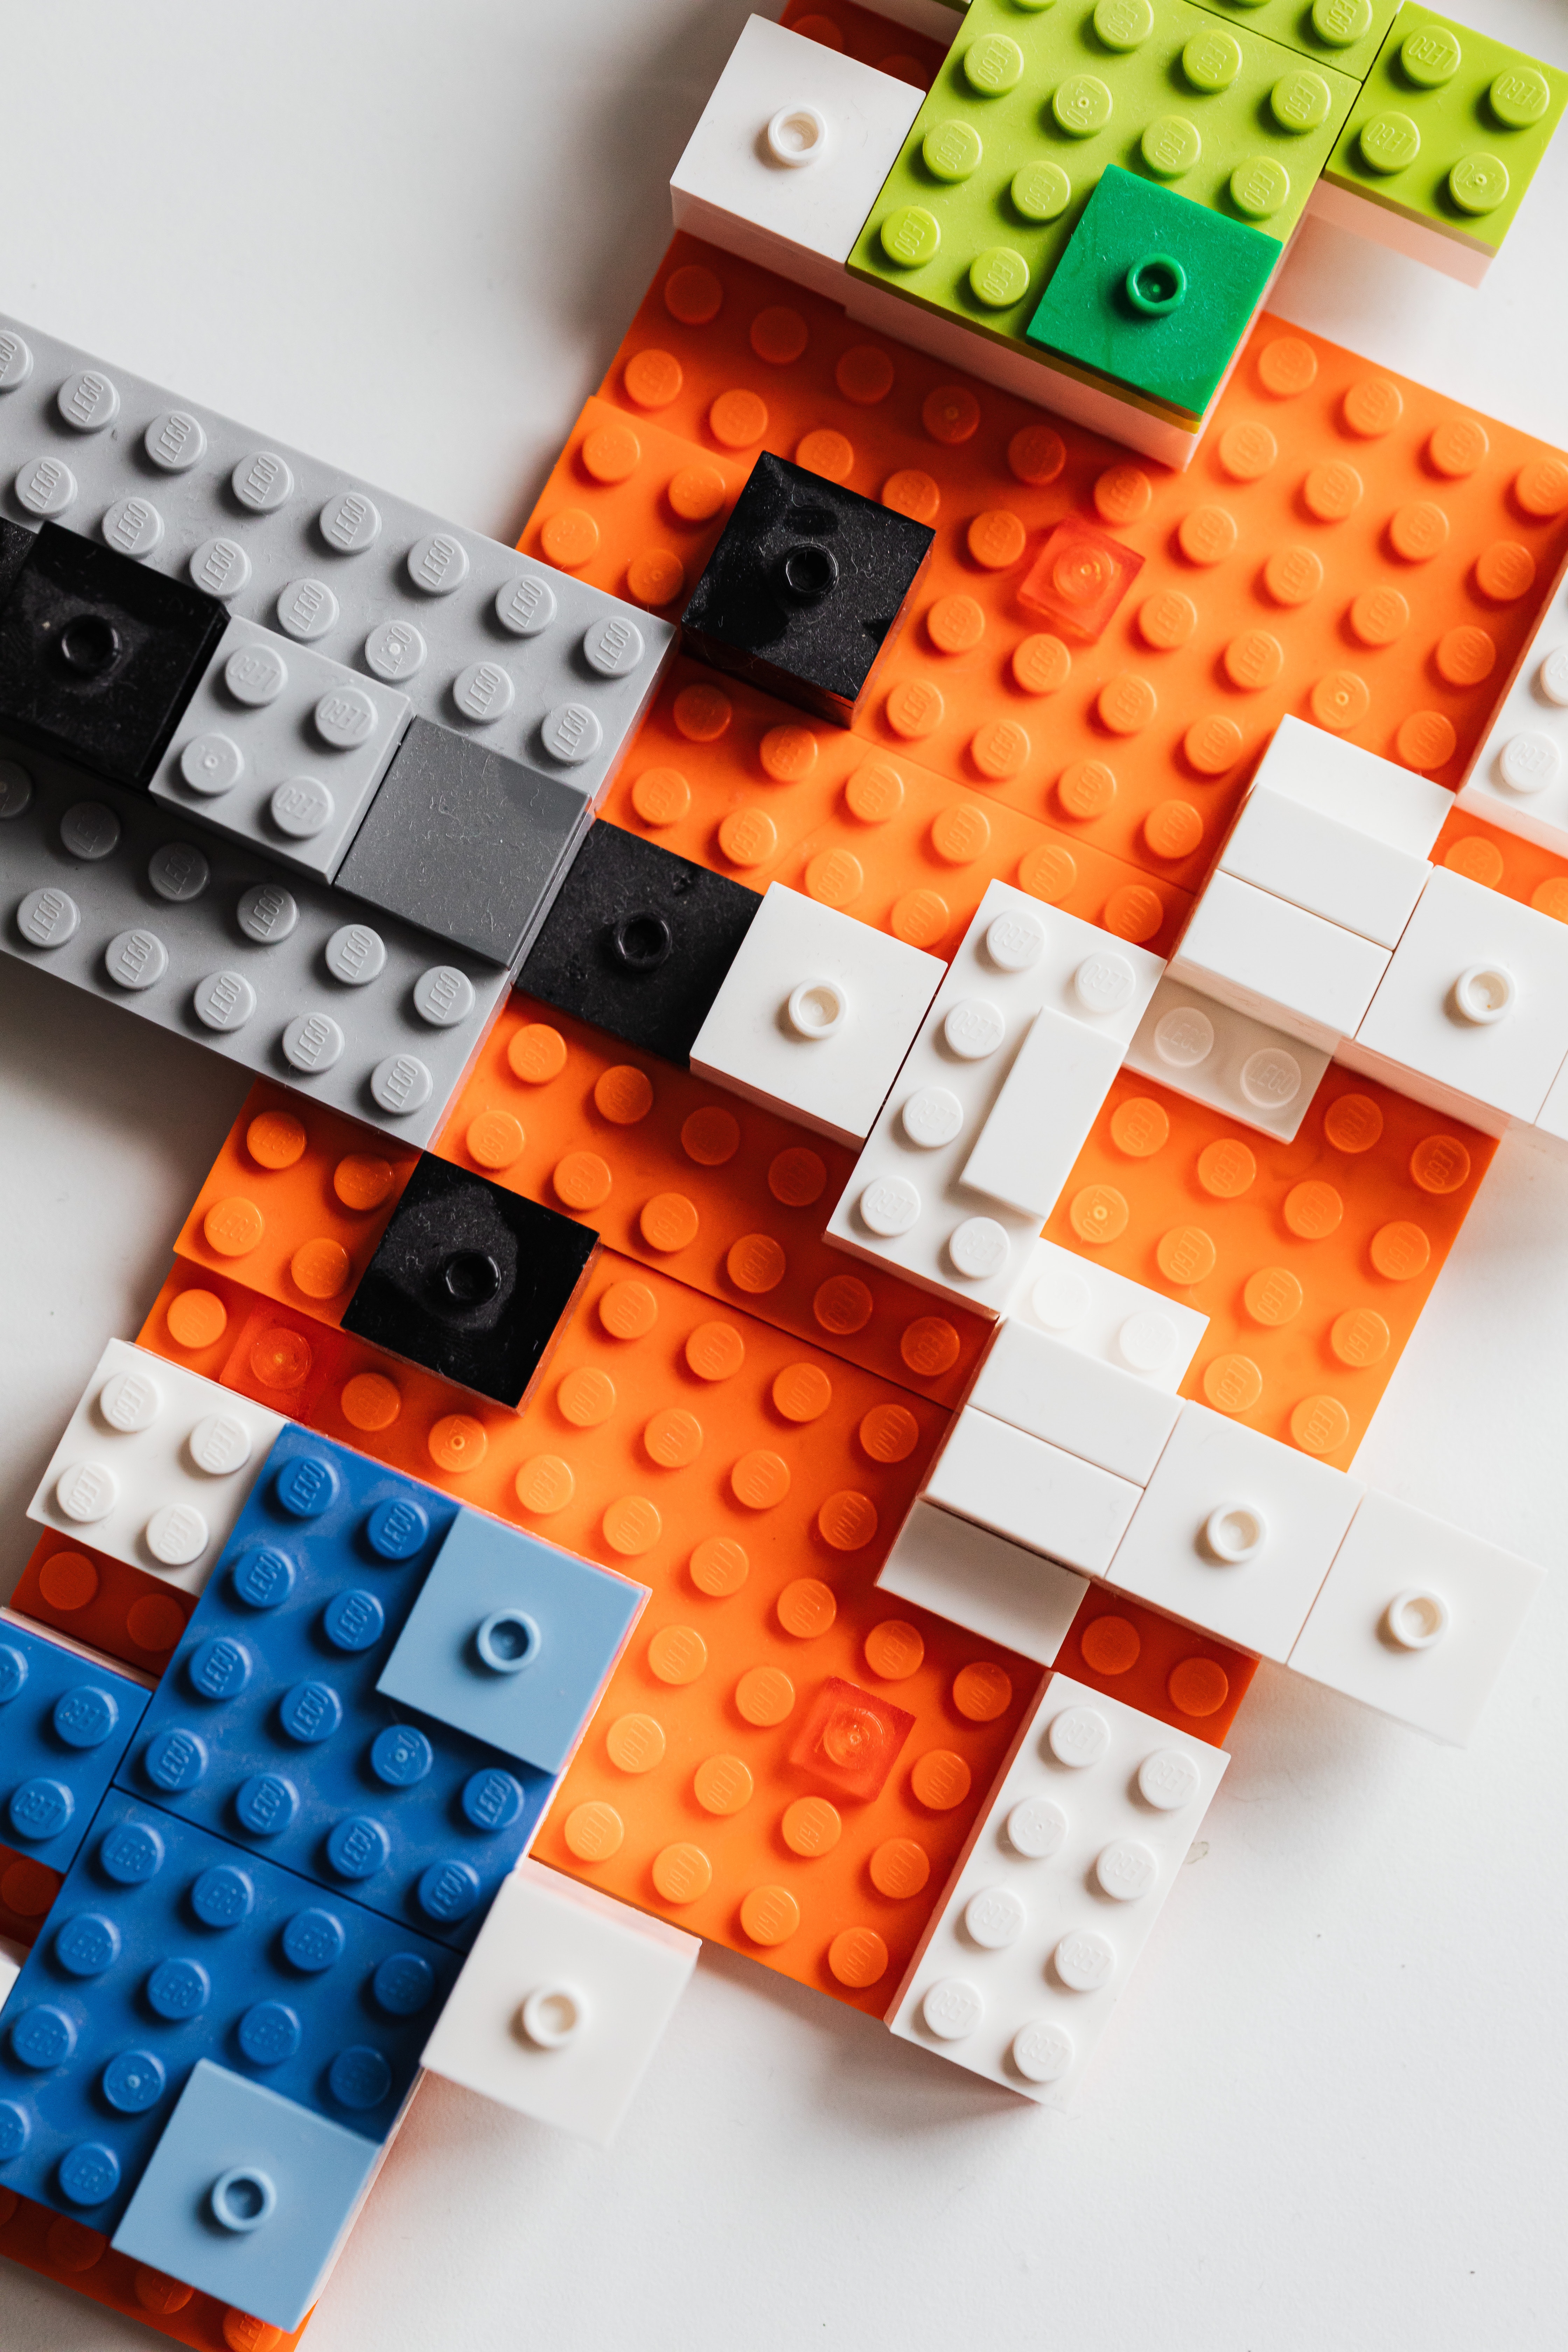 Abstract Lego arrangement with orange, white, green, grey, and blue blocks